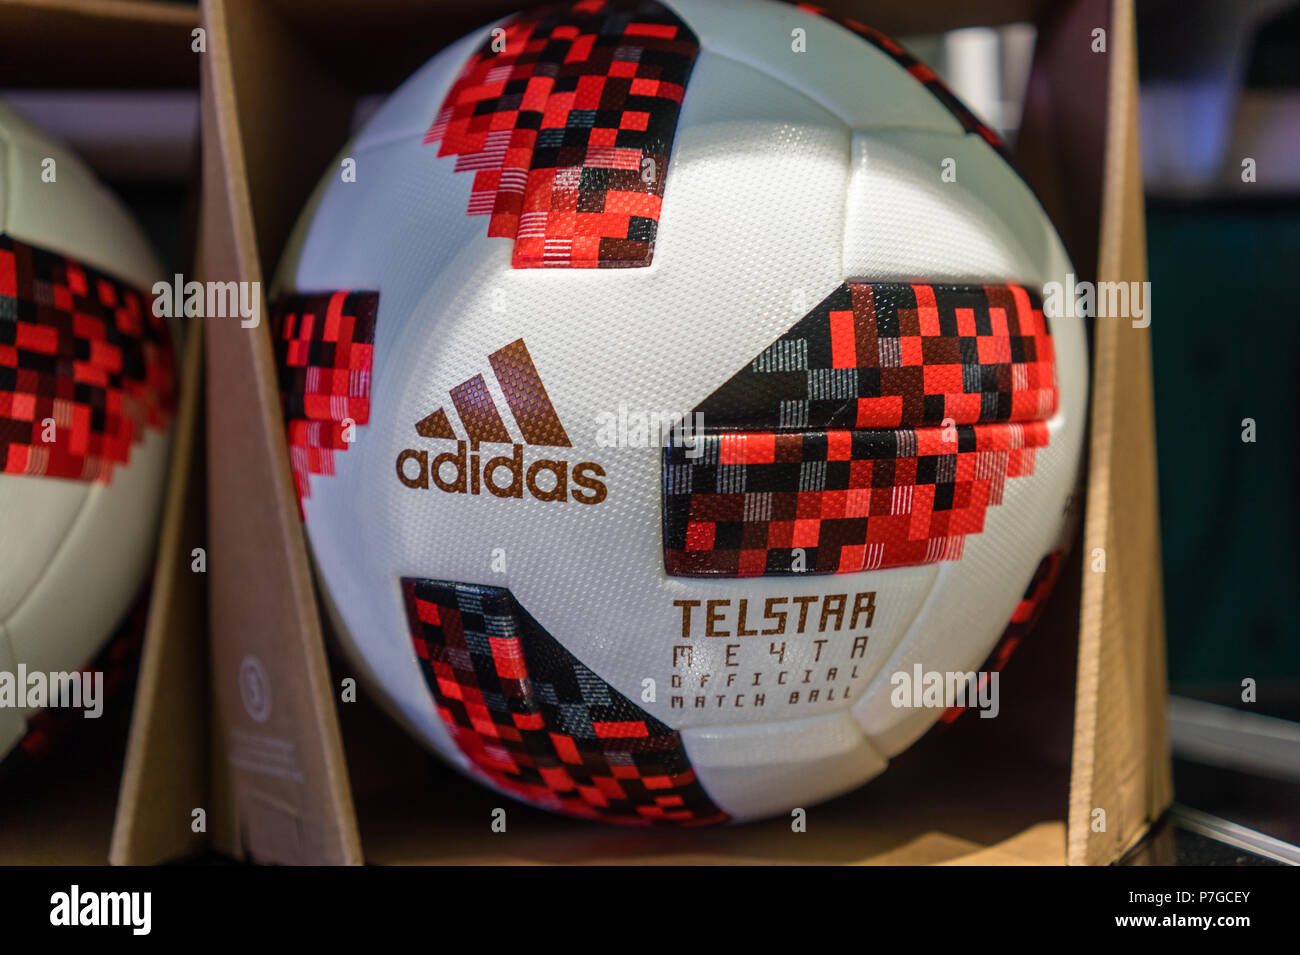 2 July 2018 Moscow, Russia The official ball for the FIFA World Cup 2018  football playoff games Adidas Telstar Mechta Stock Photo - Alamy